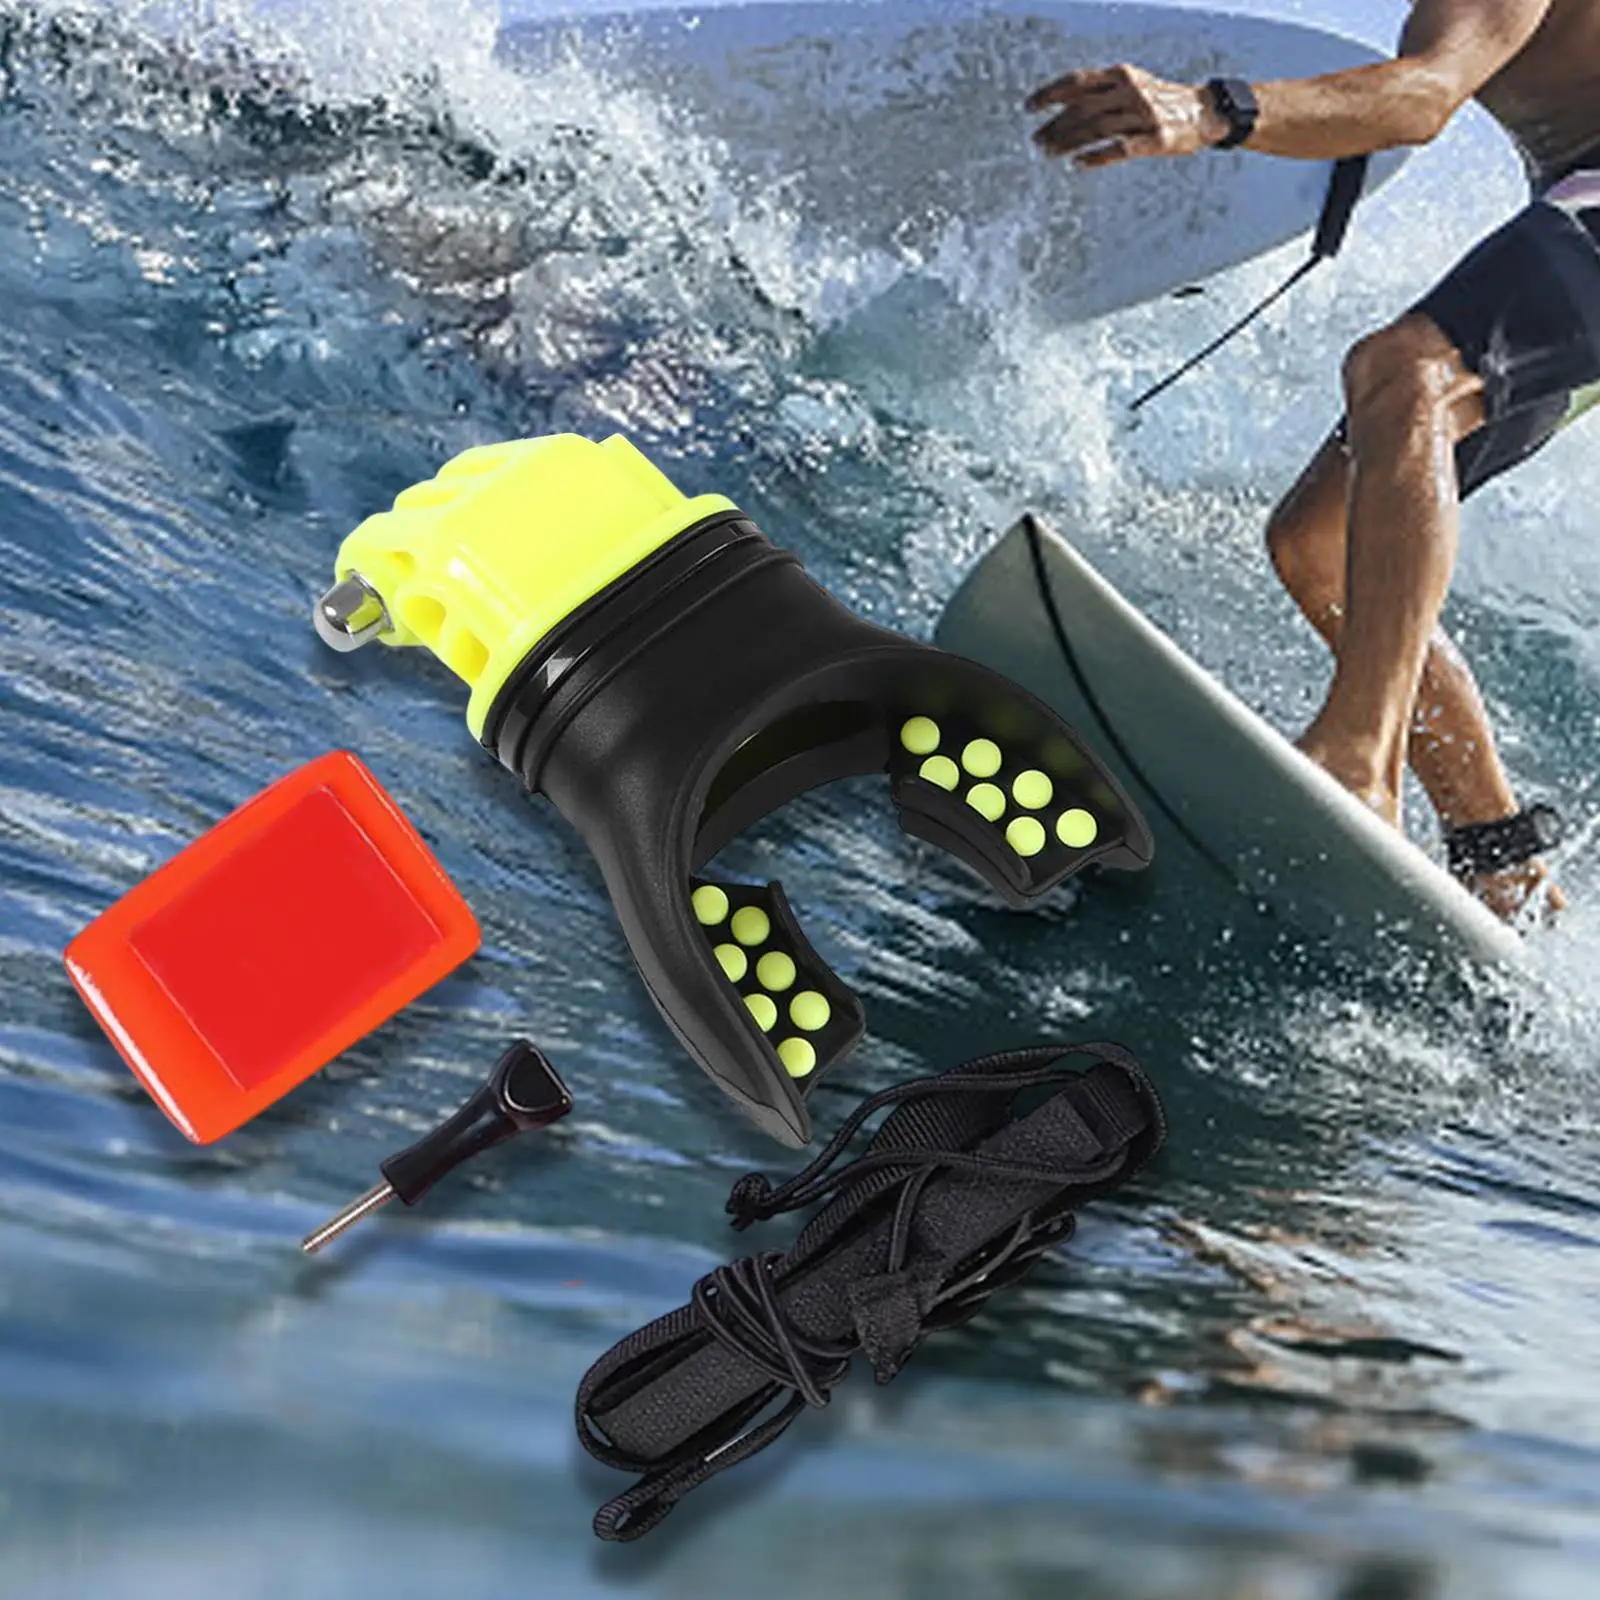 Silicone Bite Mount Mouth Holders Surf Dive Mouth Piece for Action Camera for Skiing Water Sports Kayaking Skating Swimming